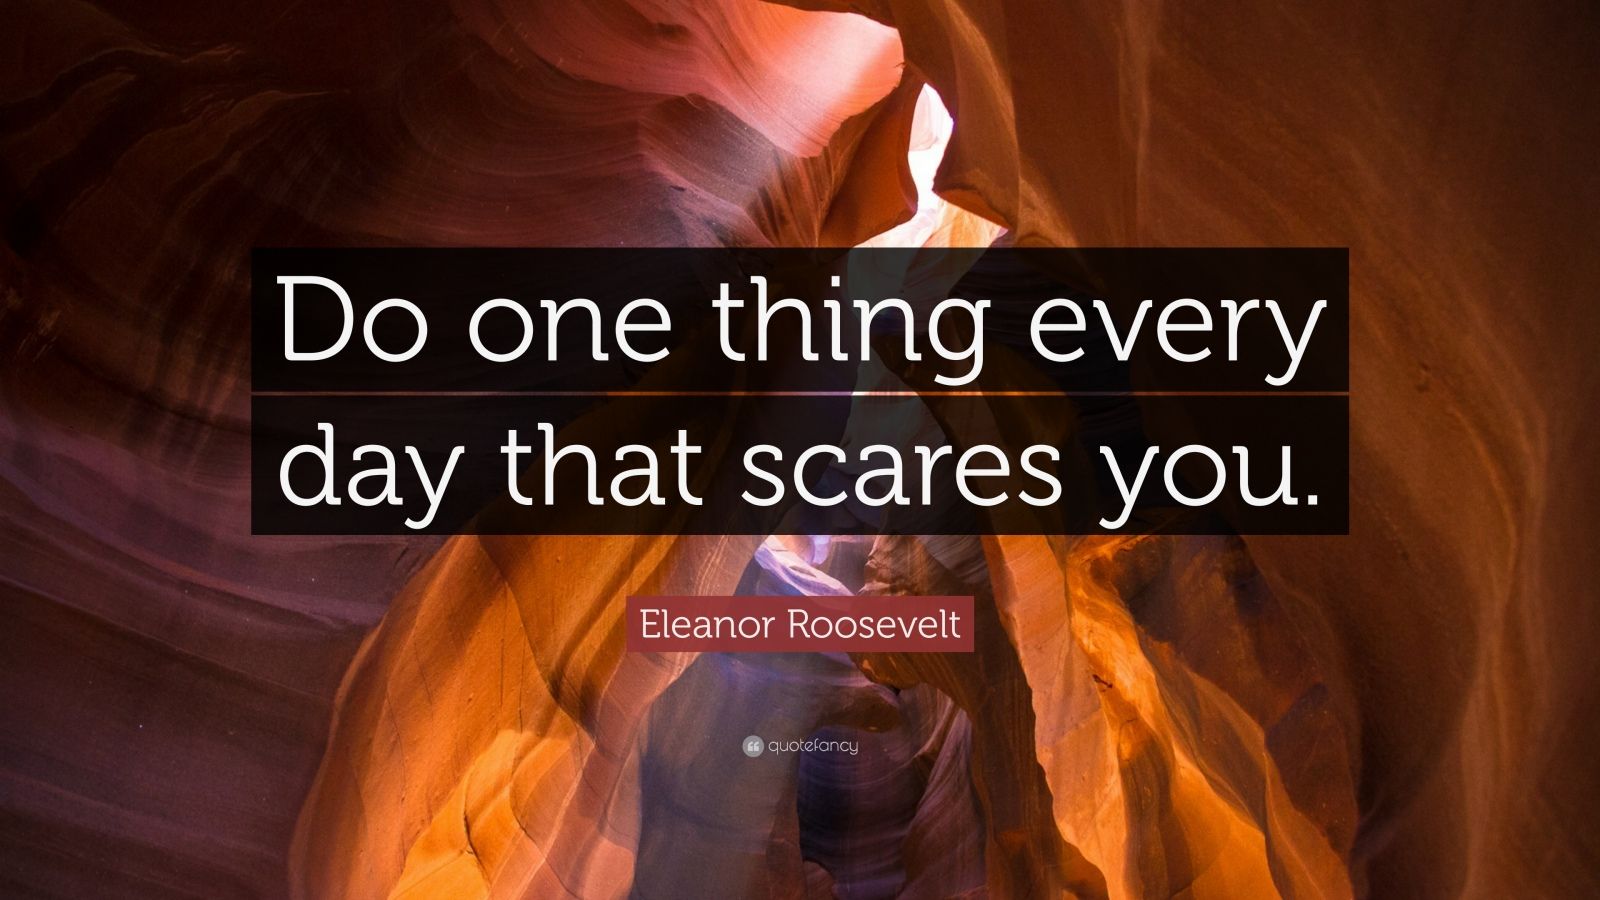 Eleanor Roosevelt Quote: “Do one thing every day that scares you.” (23